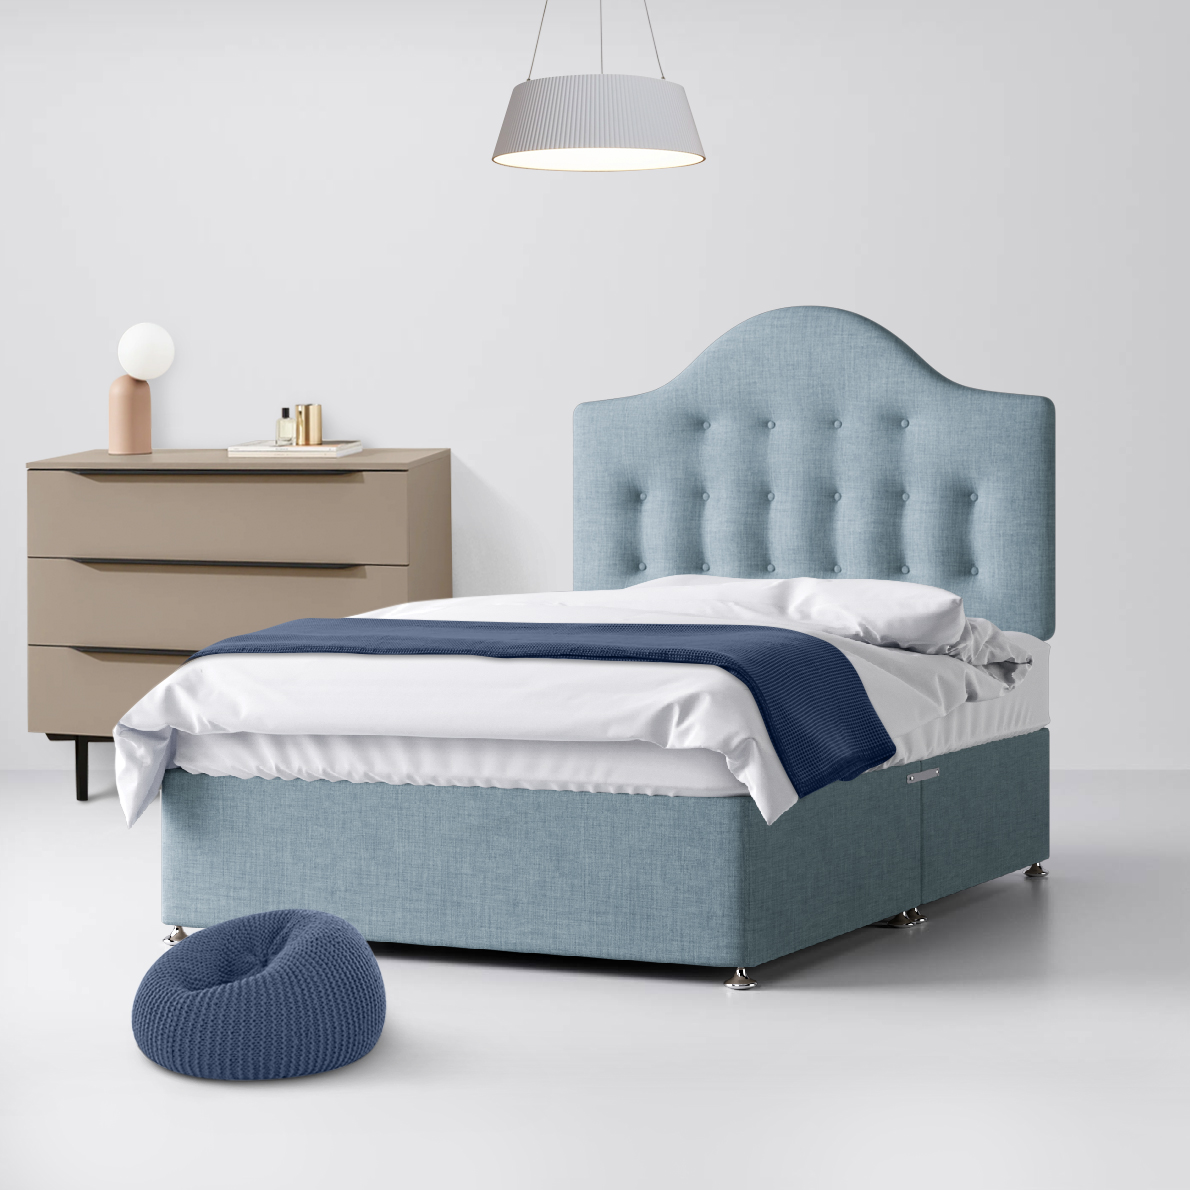 Small Single - Divan Bed and Victor Buttoned Headboard - Duck Egg Blue - Fabric - 2ft6 - Happy Beds